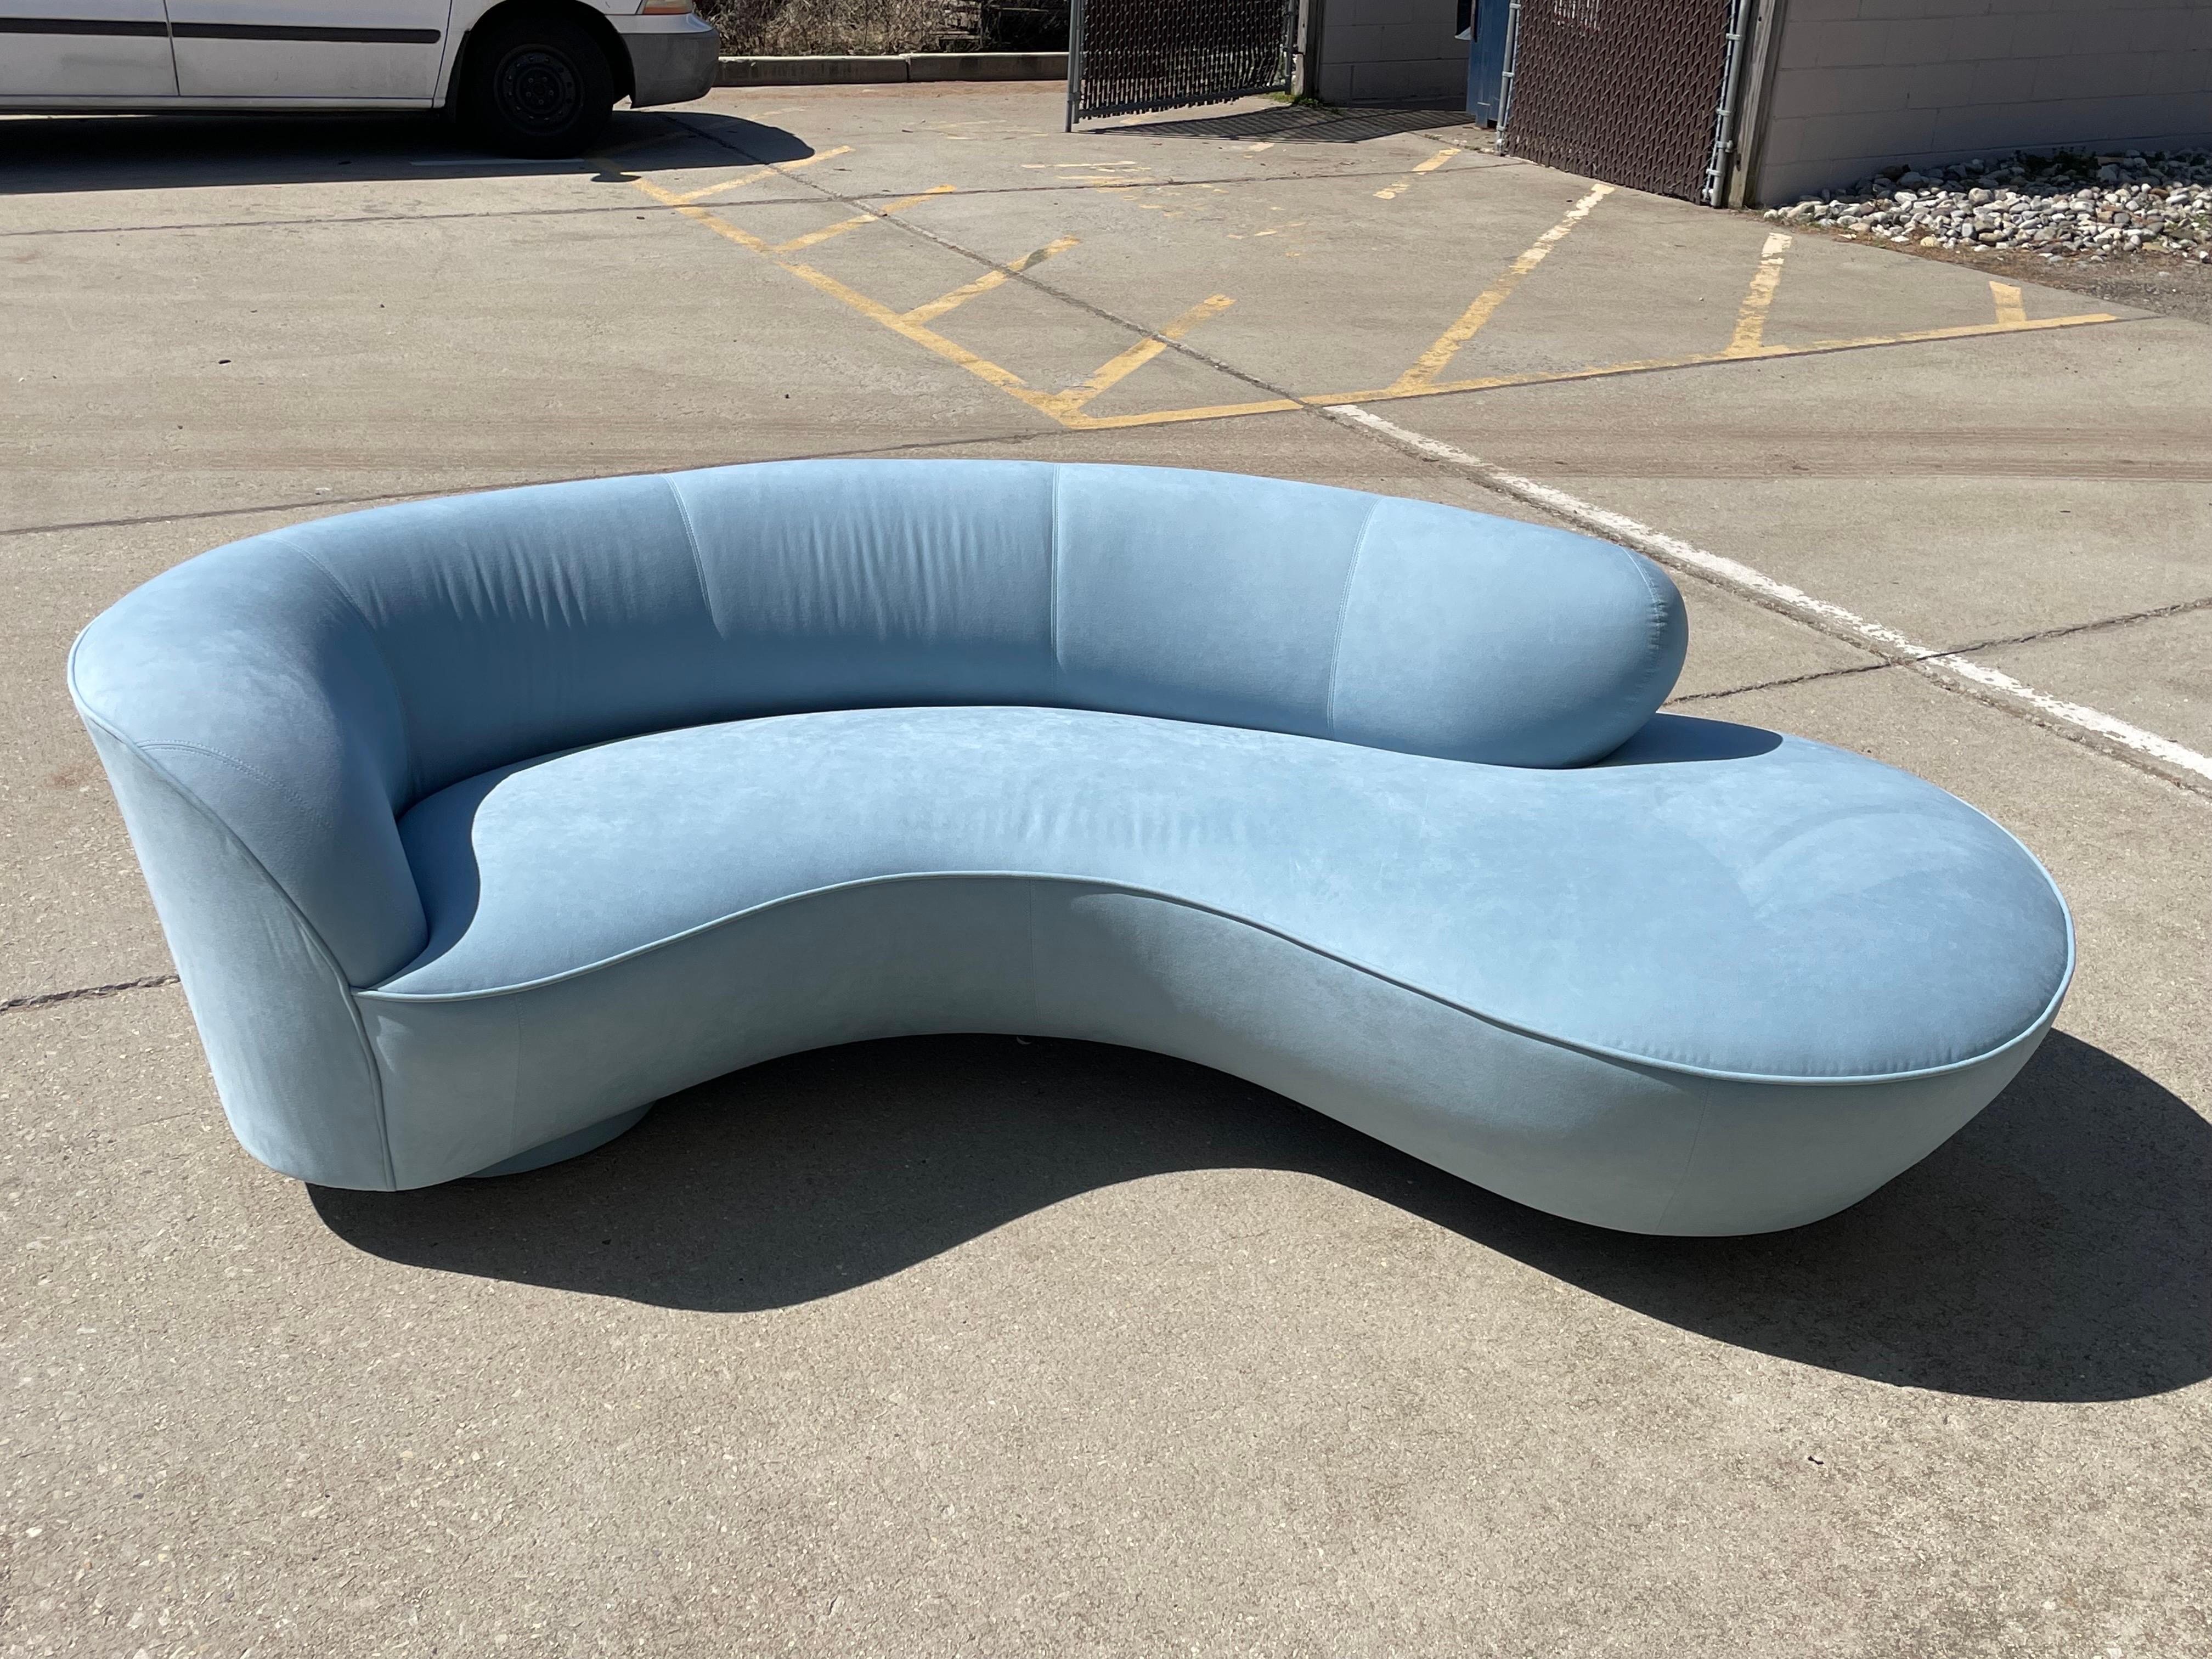 Contemporary Pair of Opposing Complimentary Vladimir Kagan Serpentine Sofas for Directional